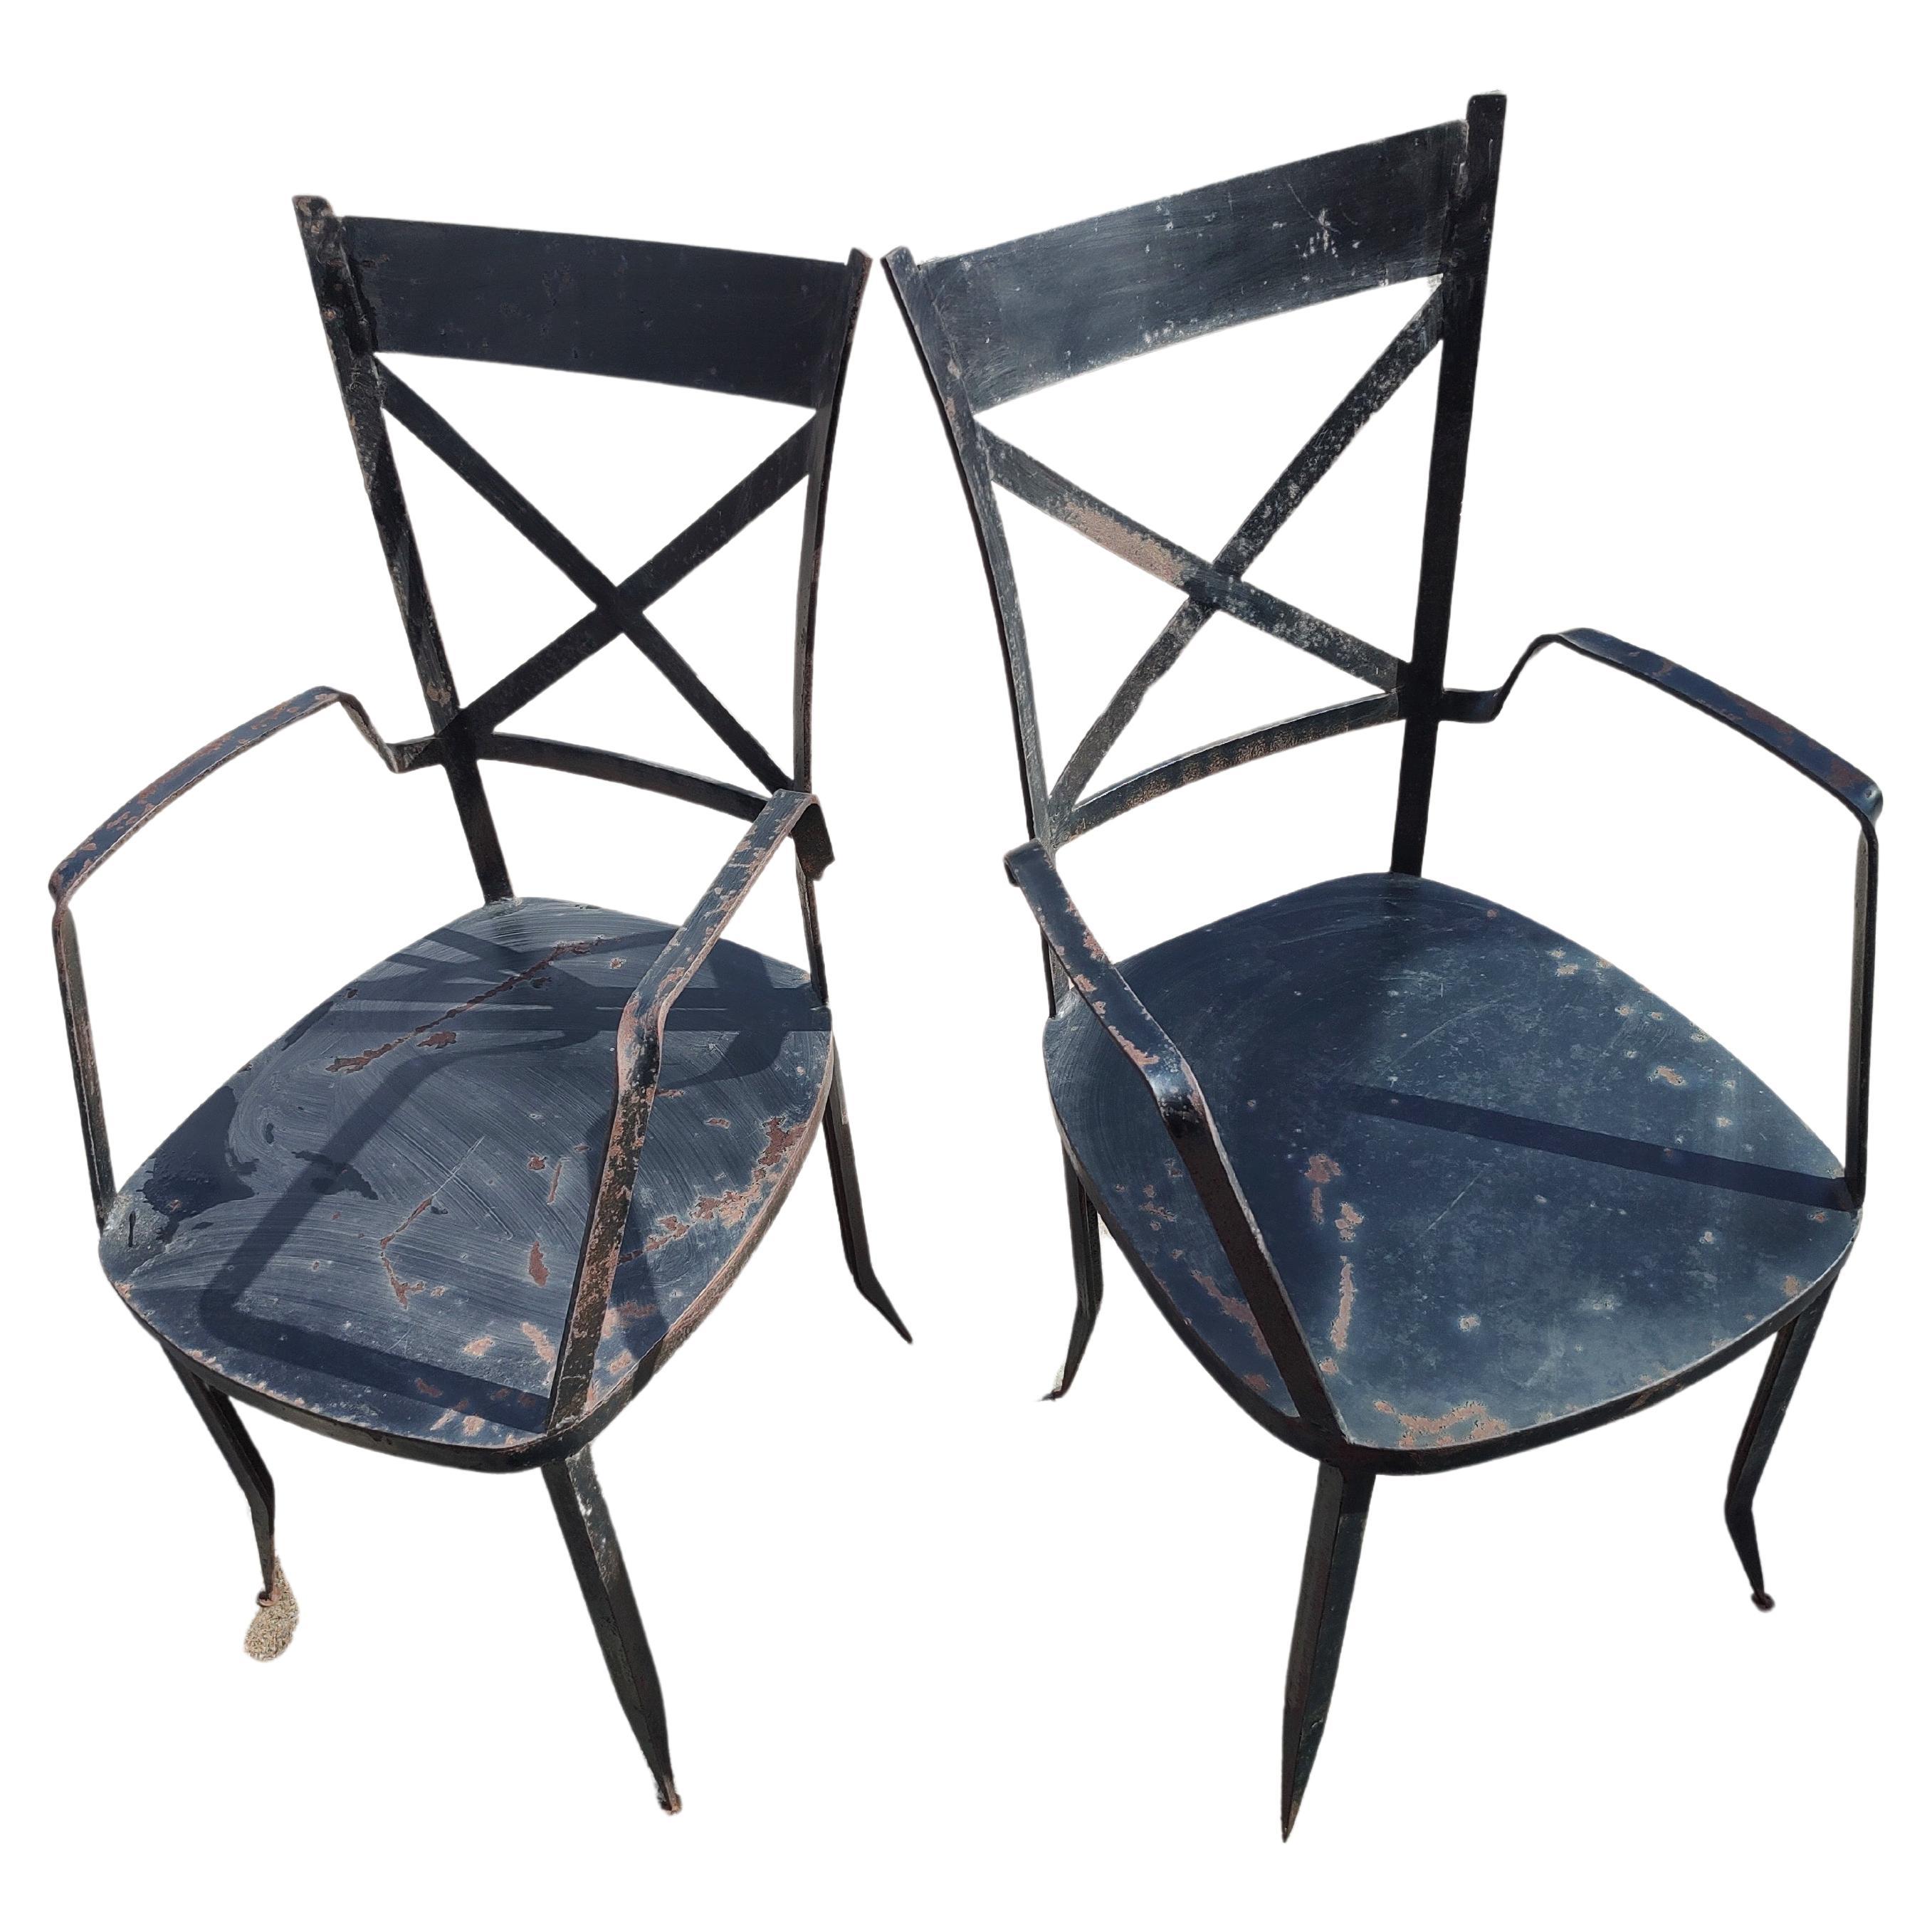 Fabulous pair of angular modern garden patio dining armchairs. High quality hand made in raw iron and steel. Chairs are very heavy and have lots of patina from living outside. Structurally as sound as could be. Minimalist design with a classic touch